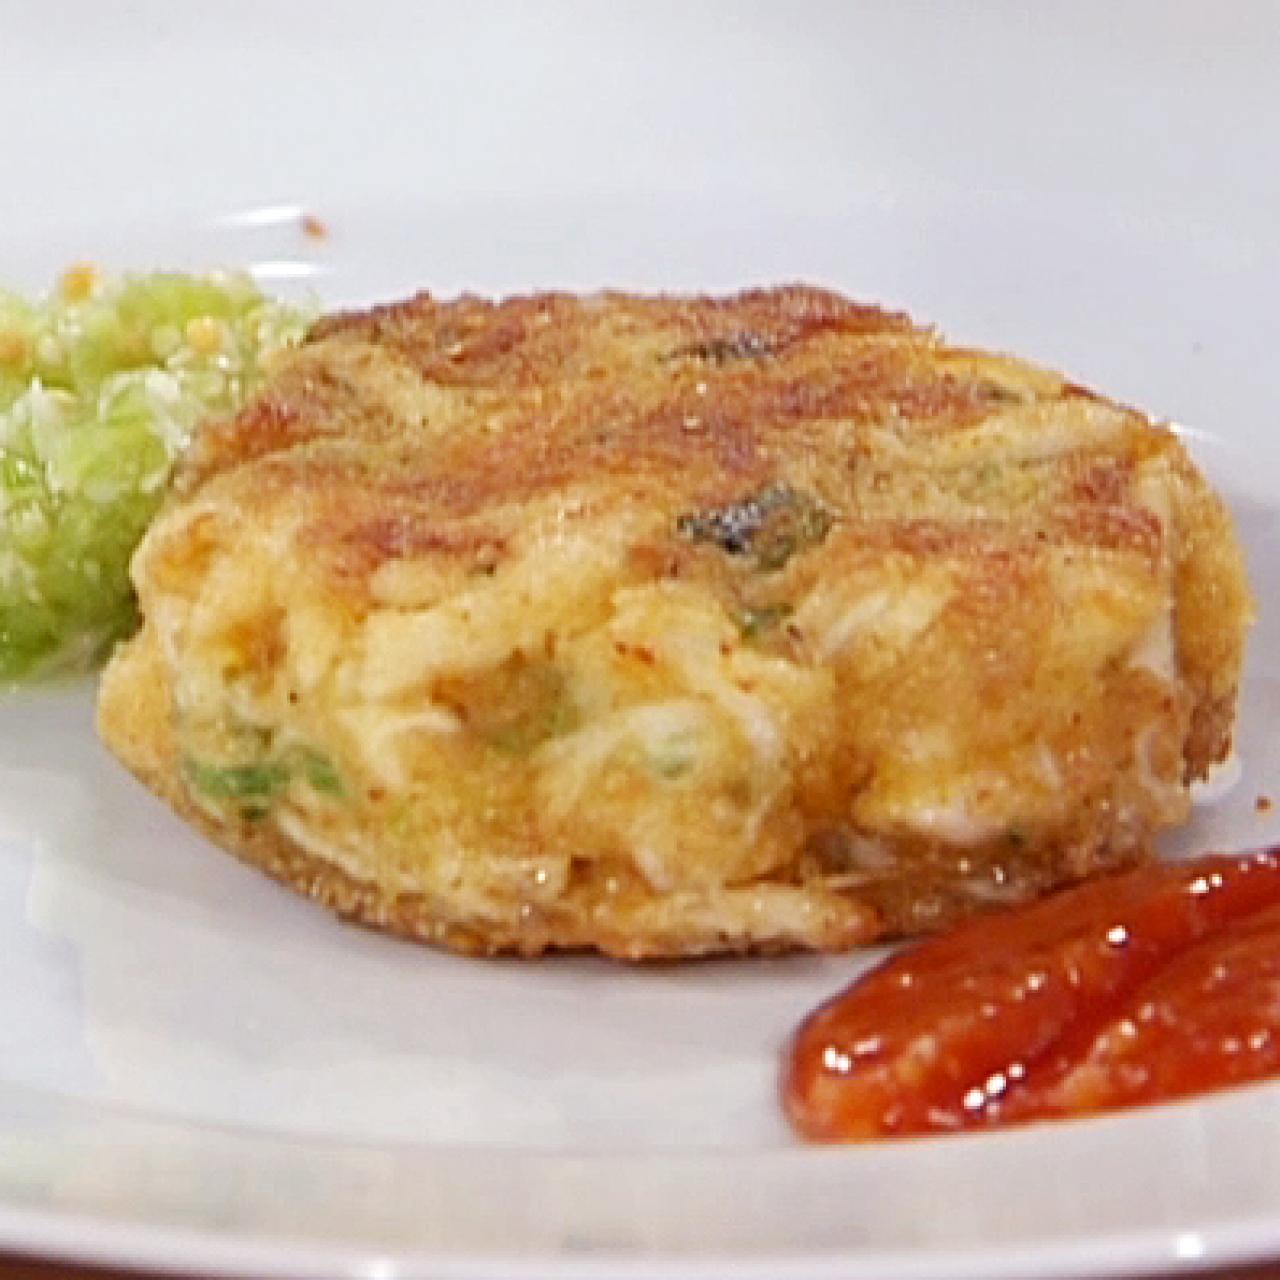 Crab Cakes recipe by Sonia Shringarpure at BetterButter